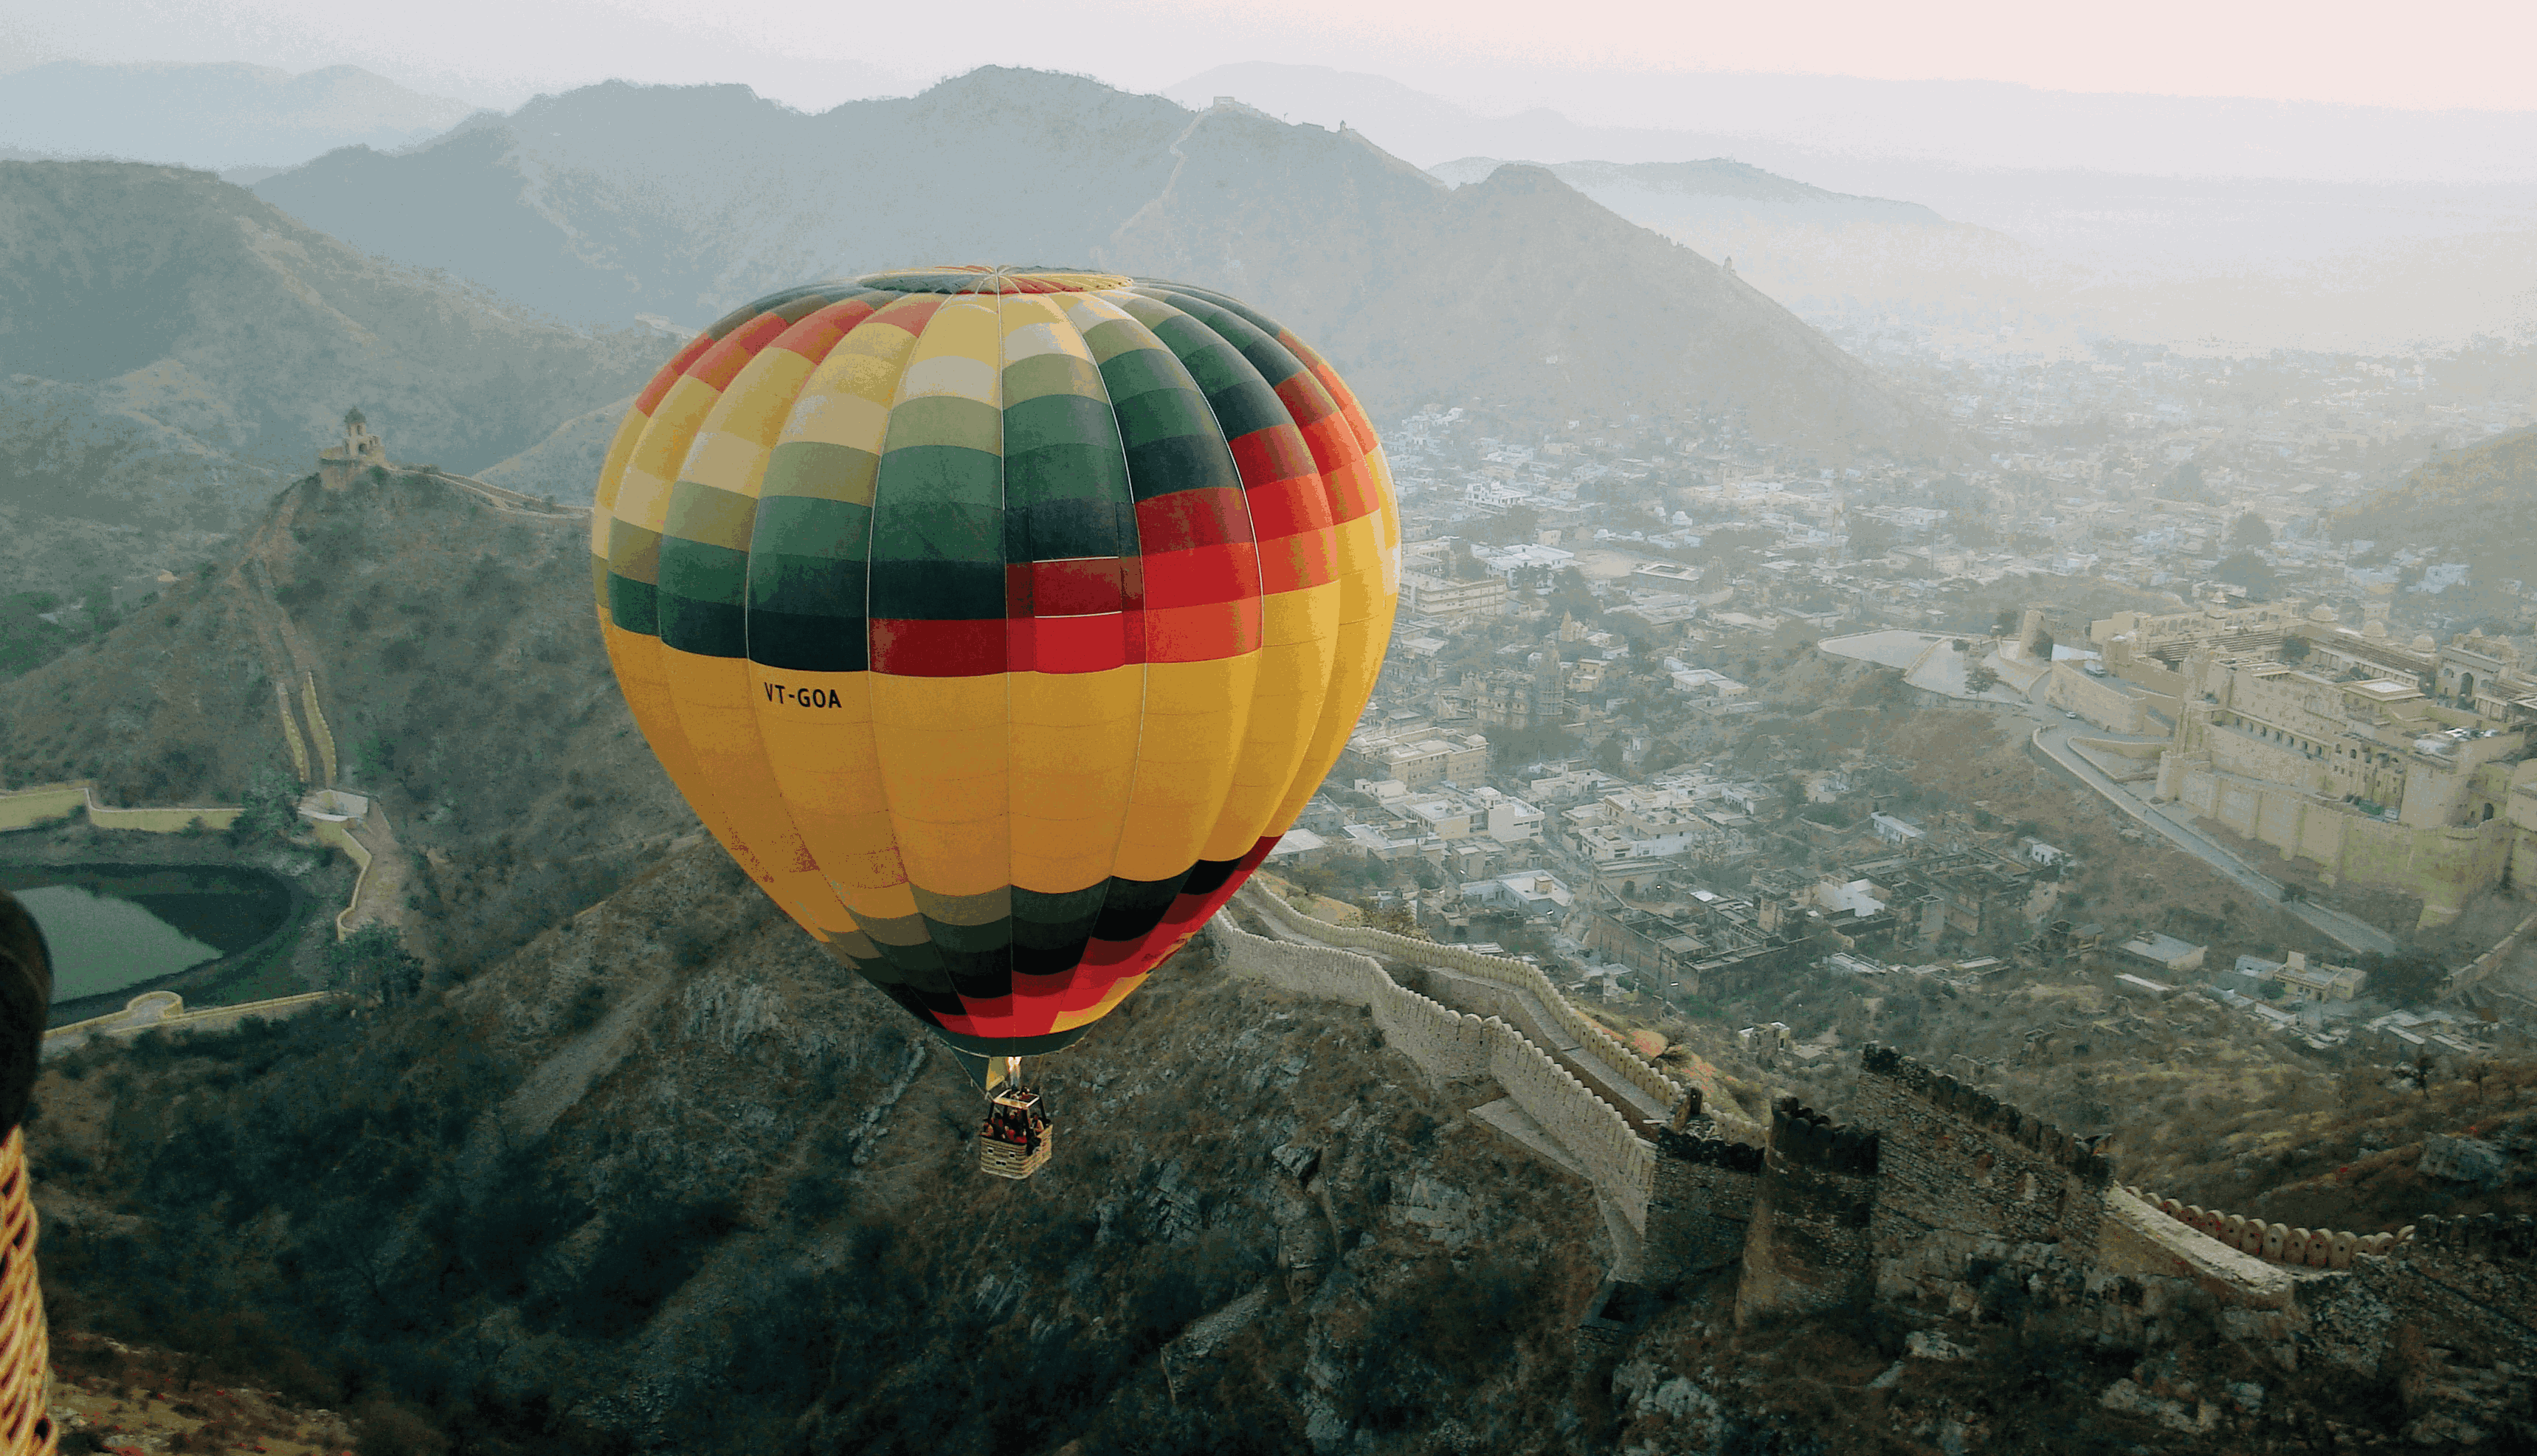 Skywaltz Balloon Safari provides you with the exhilarating experience of a hot air balloon ride at prime tourist locations in India such as Neemrana and Manesar; prime cultural destinations of Jaipur, Udaipur, and Pushkar; also topmost adventurous spots in Lonawala and Ranthambore.